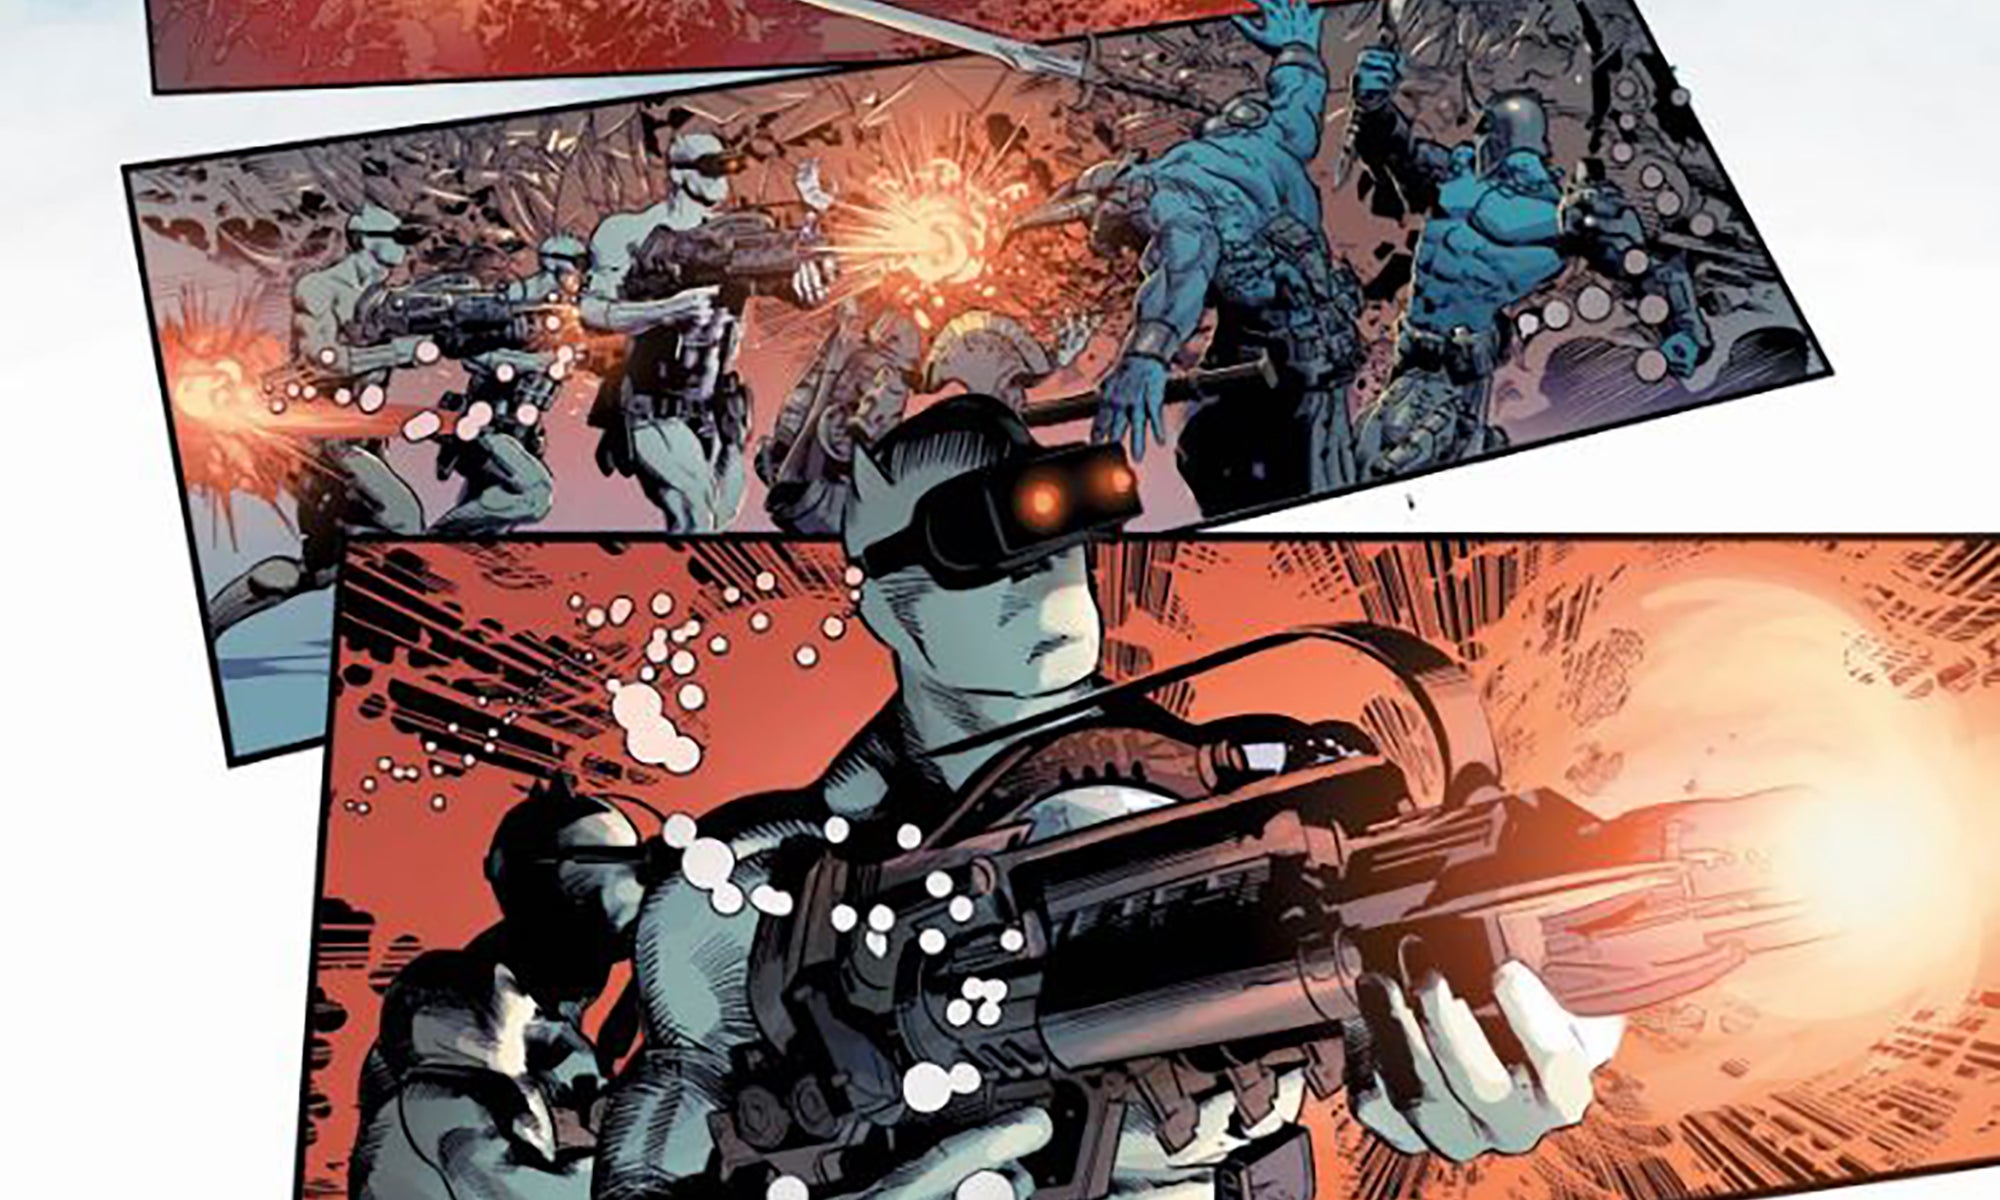 The Wakandan elite soldiers, the Hatut Zeraze, lead an all-out assault on Atlantis. From New Avengers (2013) #8. Written by Jonathan Hickman, art by Mike Deodato, Color Art by Frank Martin, Letters by Joe Caramagna.